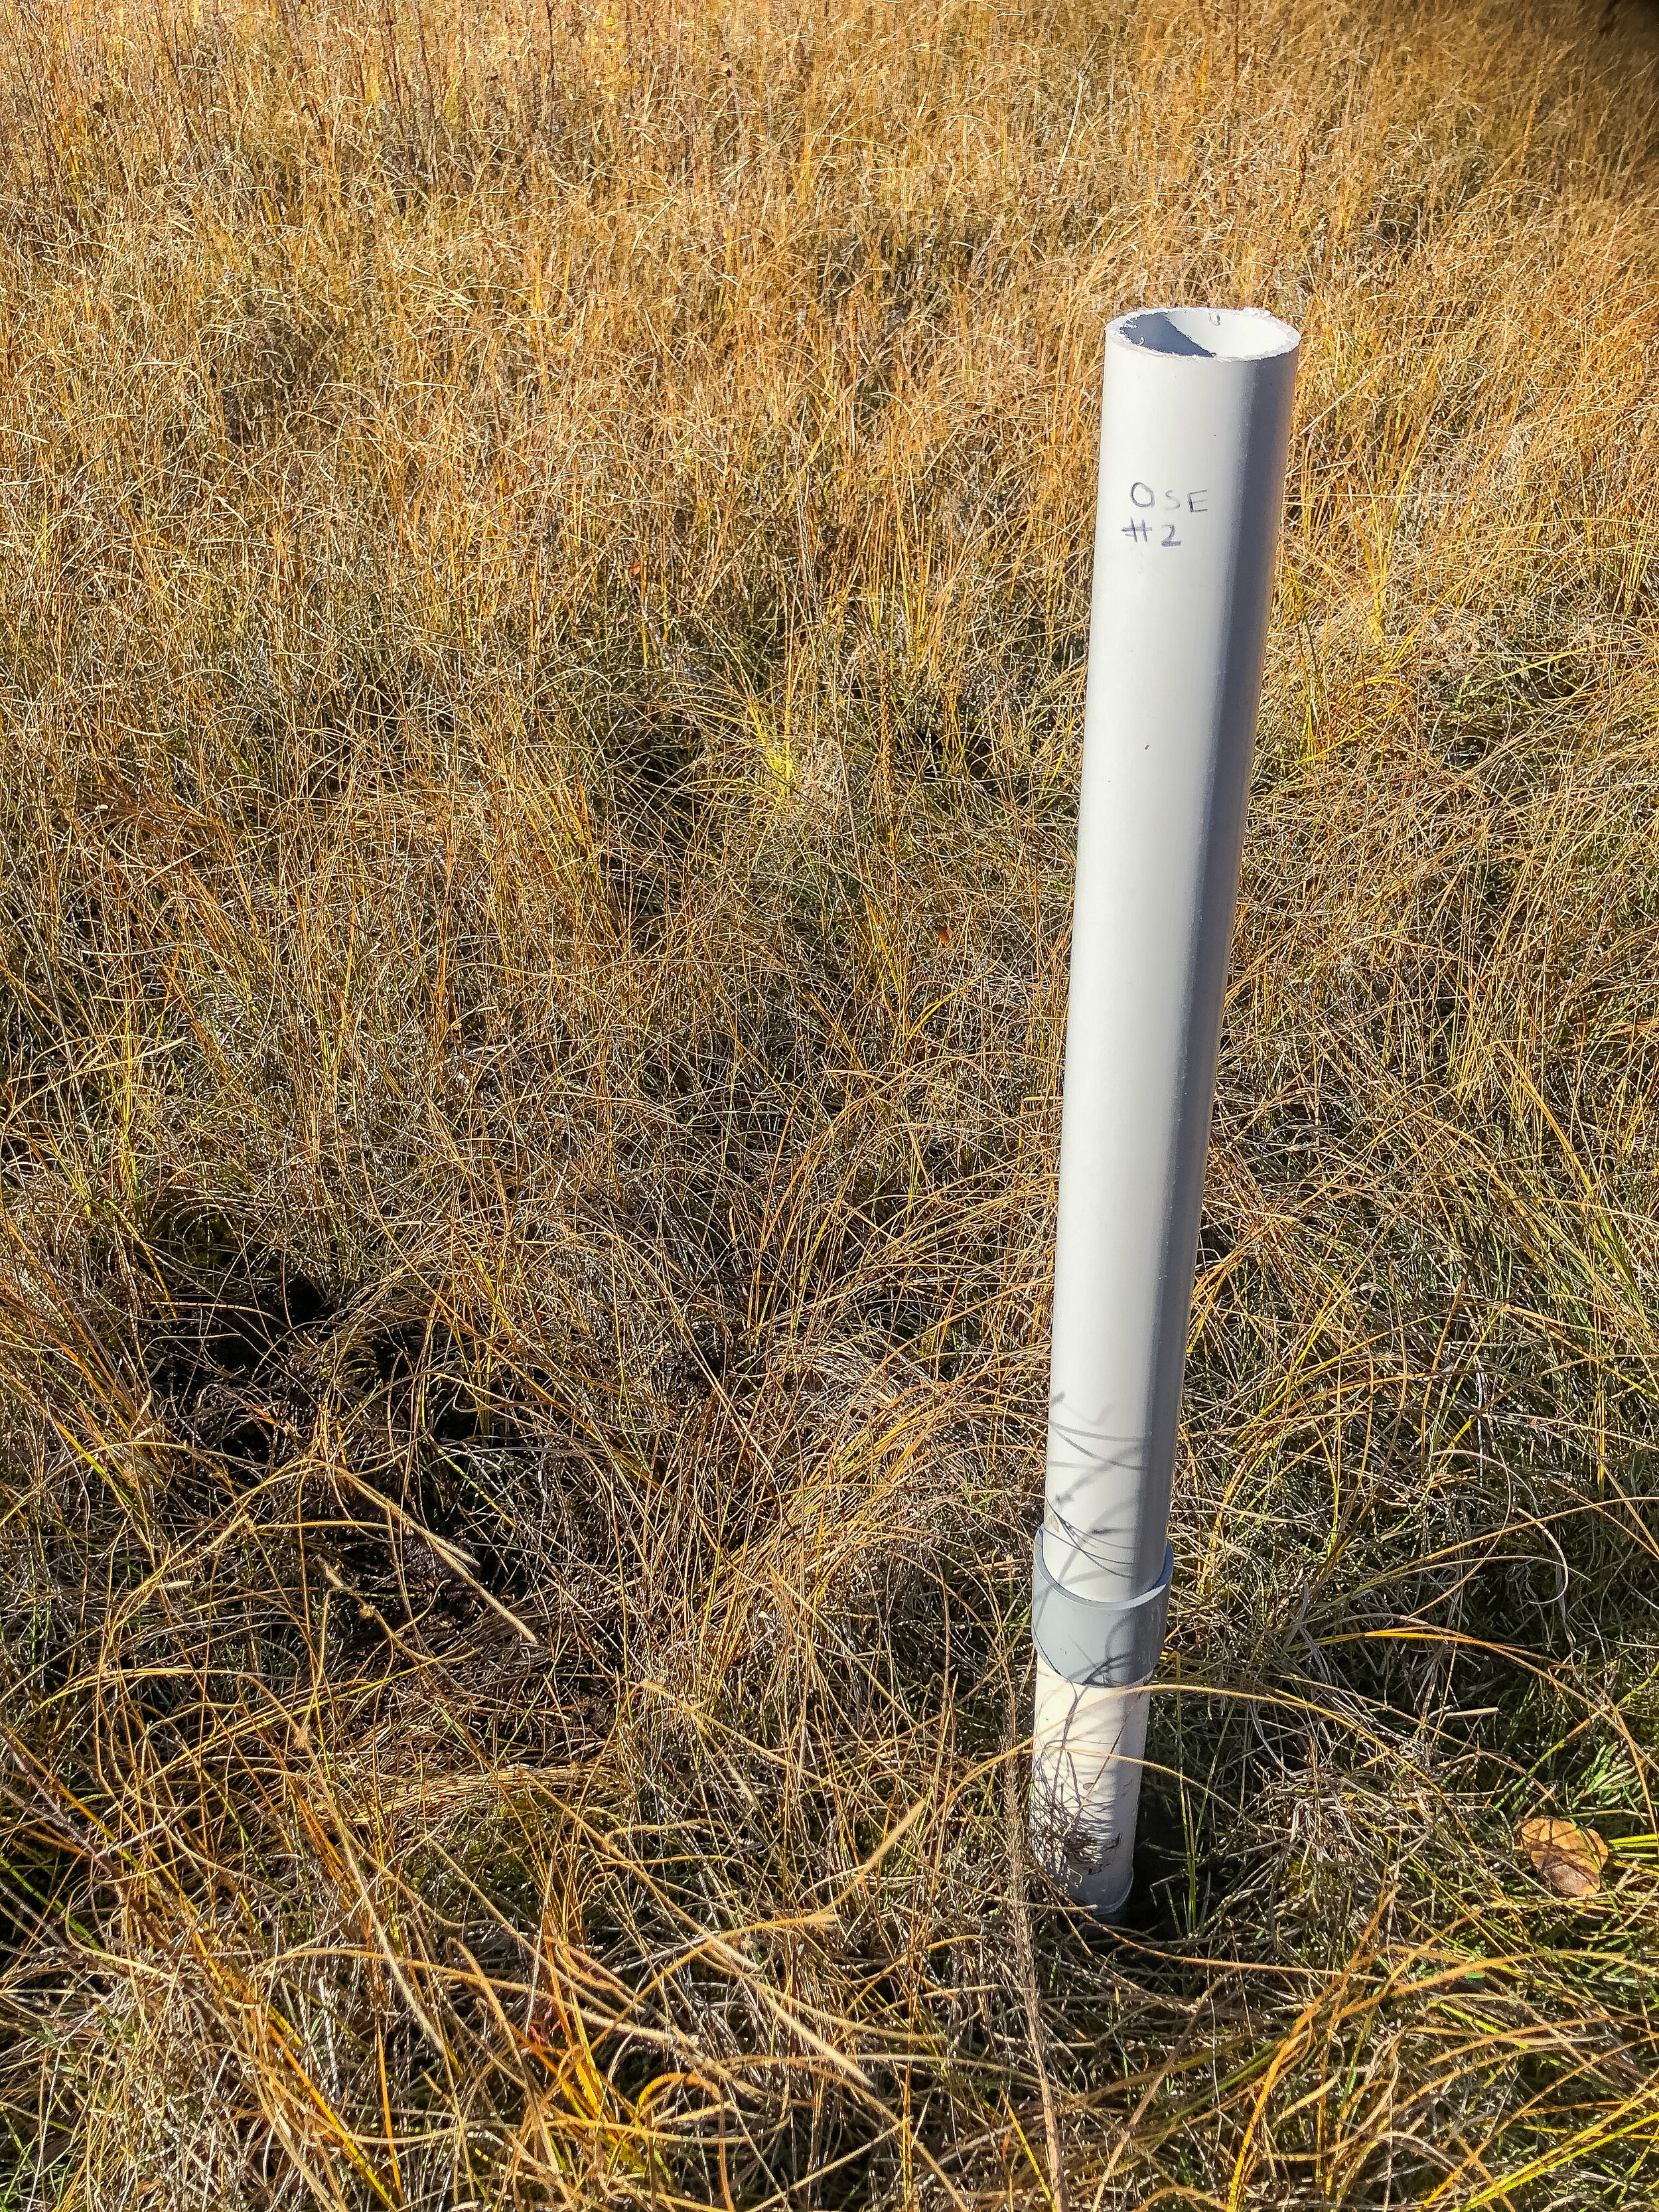 One of 16 monitoring wells installed at Evergreen Park in October 2020. 